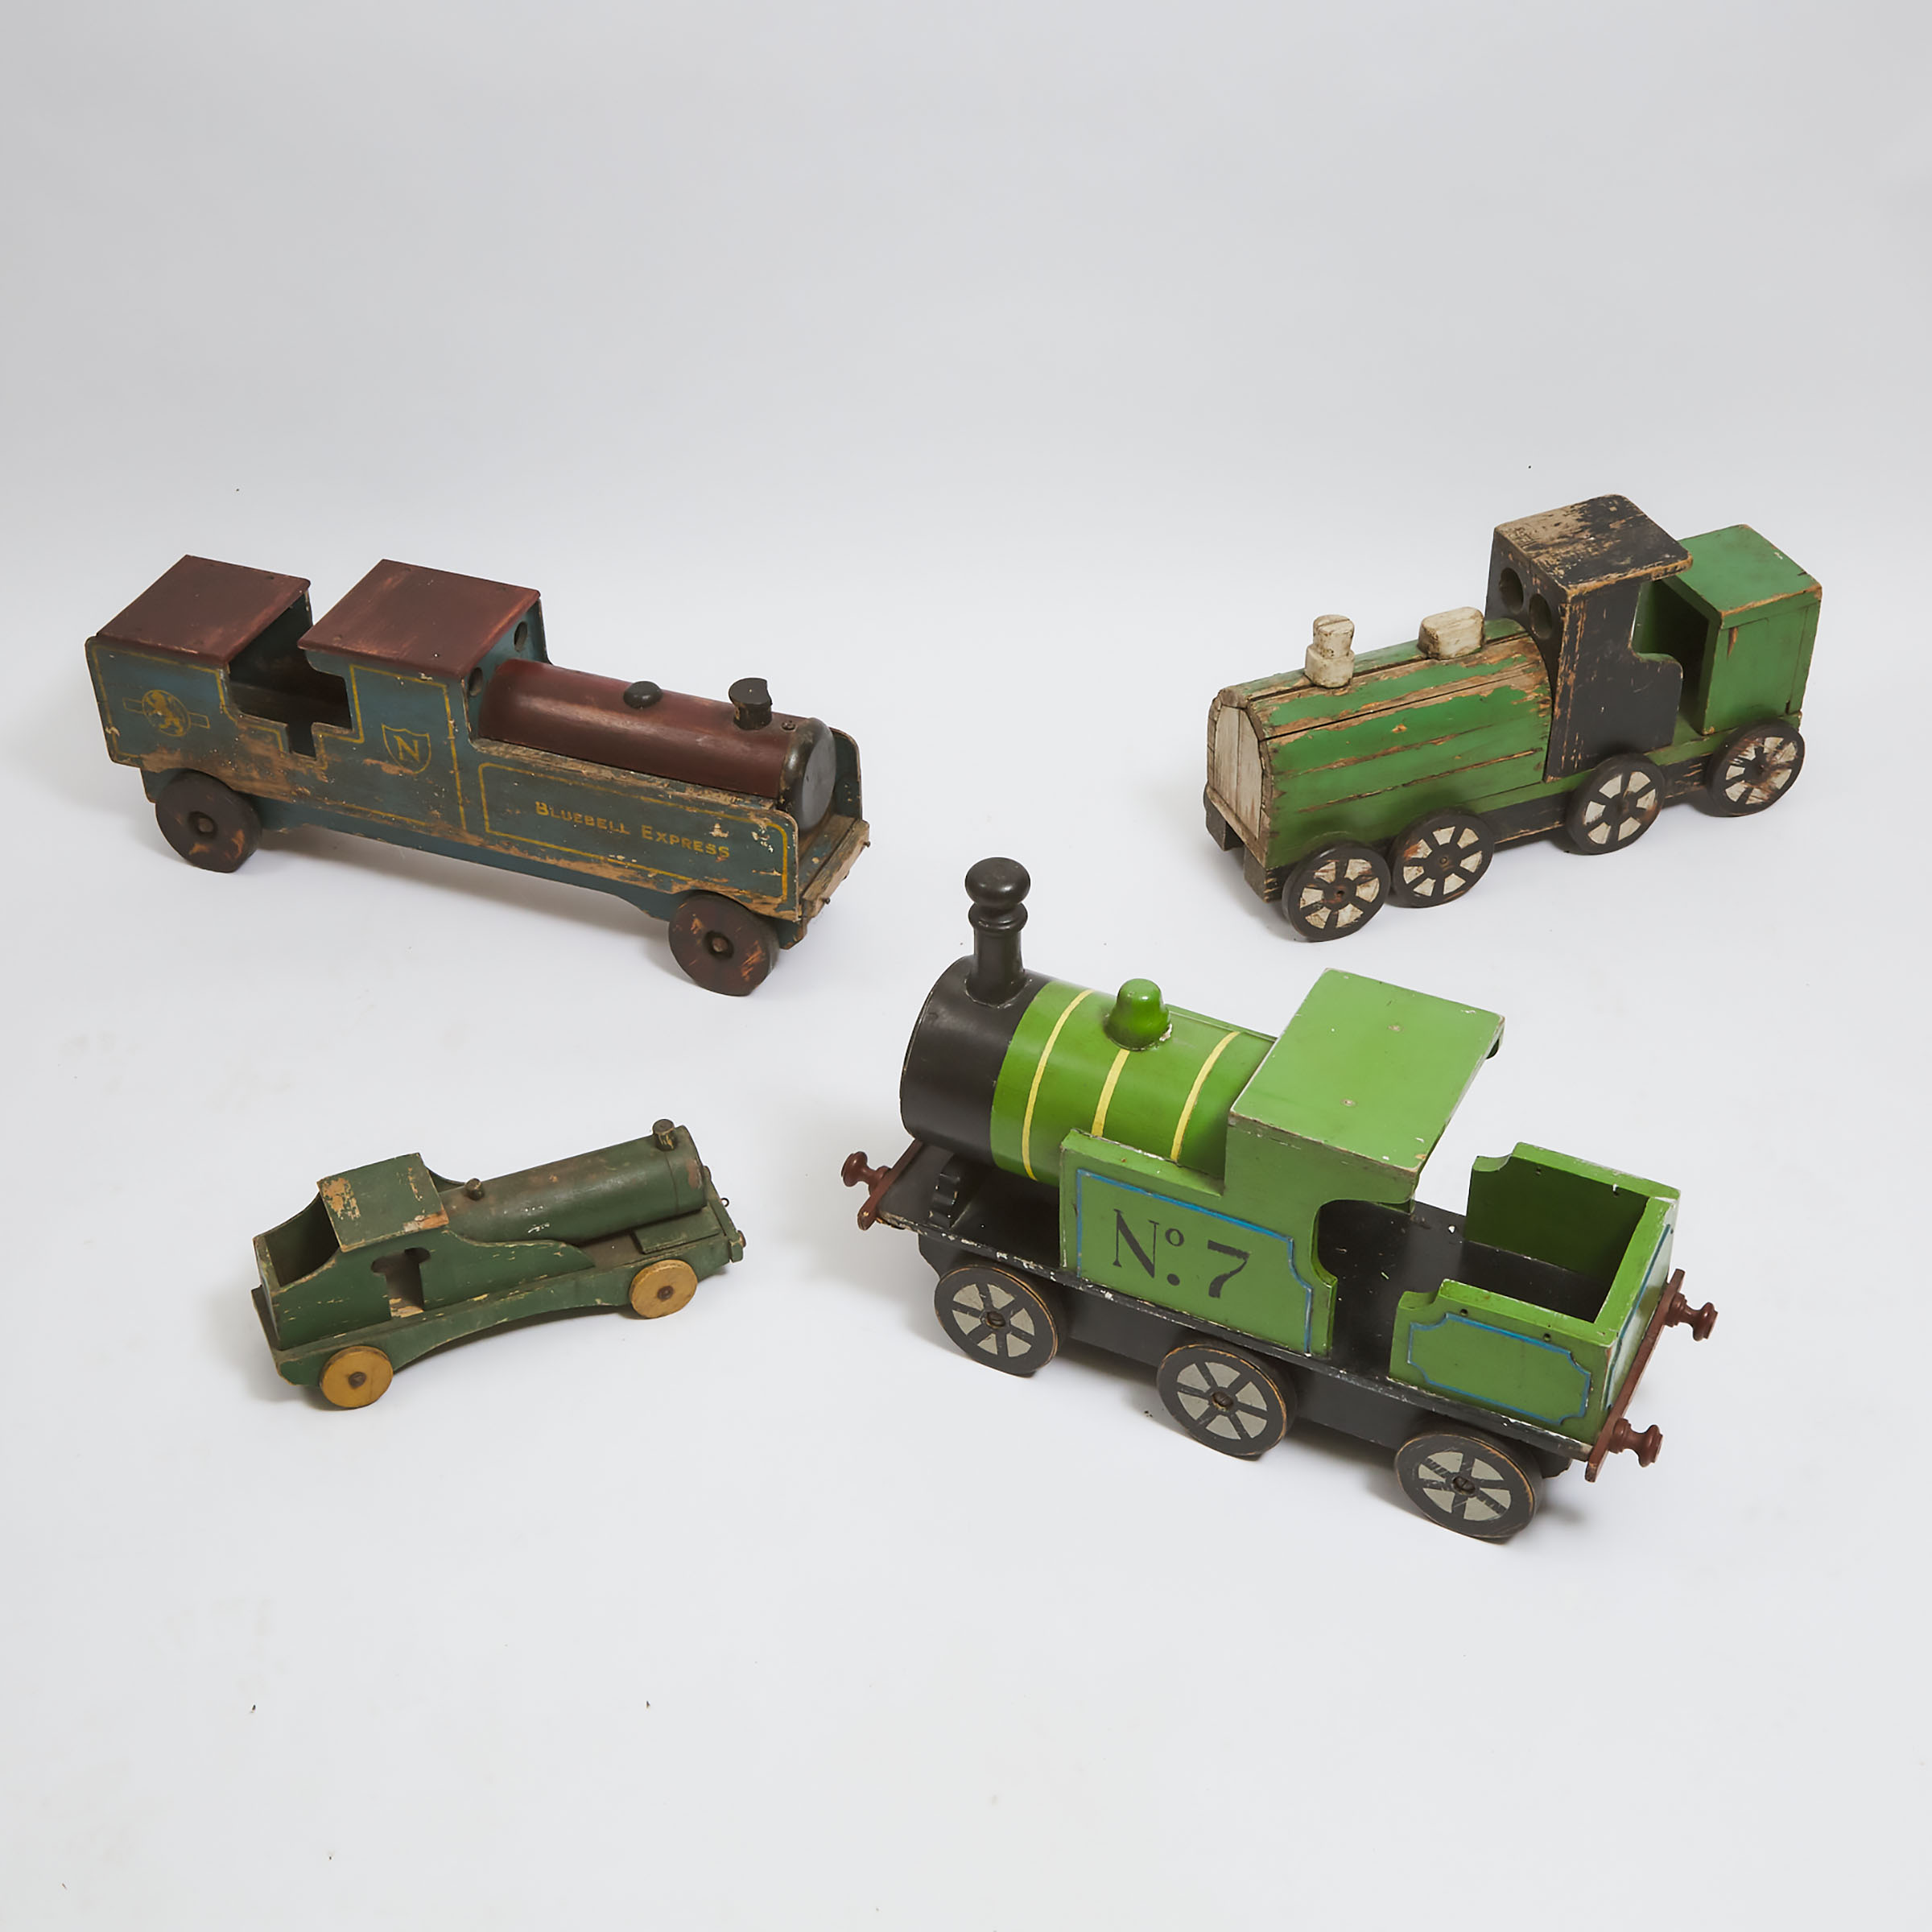 Group of Four Painted Wood Toy Train Engines, early-mid 20th century